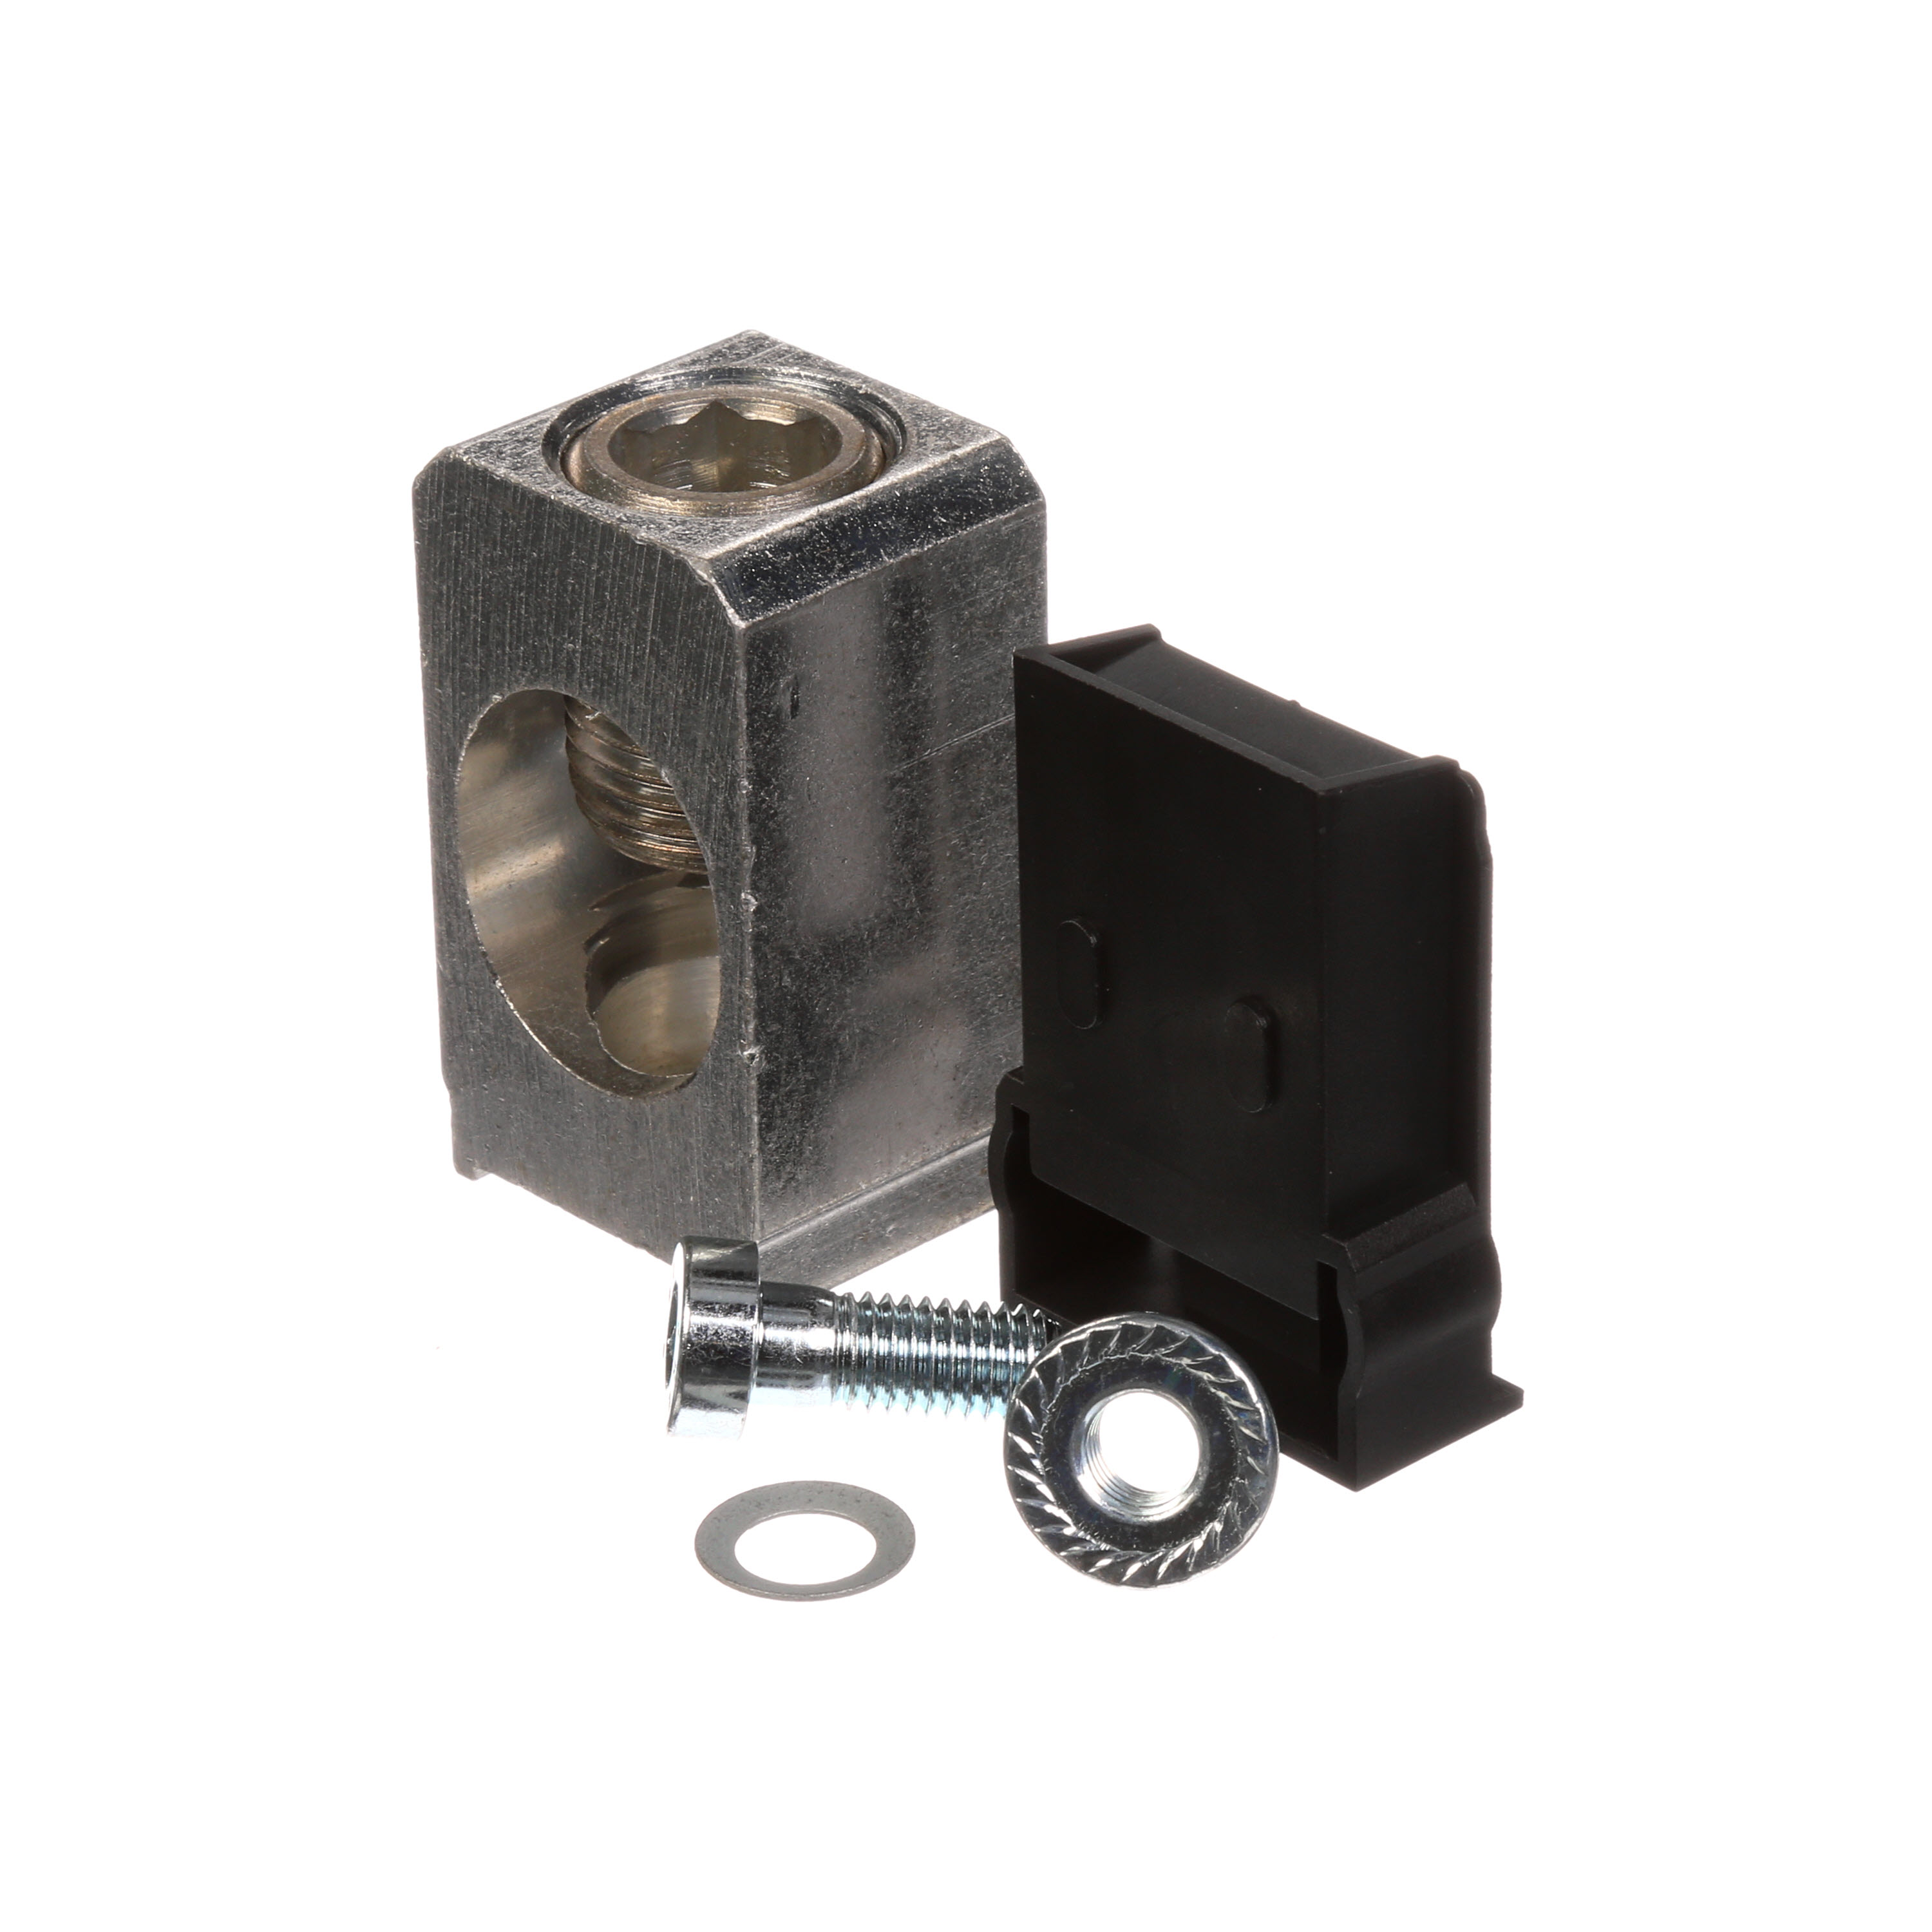 SIEMENS VL UL RATED CIRCUIT BREAKER ACCESSORY. ALUMINUM BODY LUG FOR 70A - 400AJG FRAME BREAKER. WIRE RANGE 3/0AWS - 600KCMIL (CU) / 250 - 750 KCMIL (AL) - 1 BARREL LUG. SUITABLE FOR LINE AND LOAD SIDES.